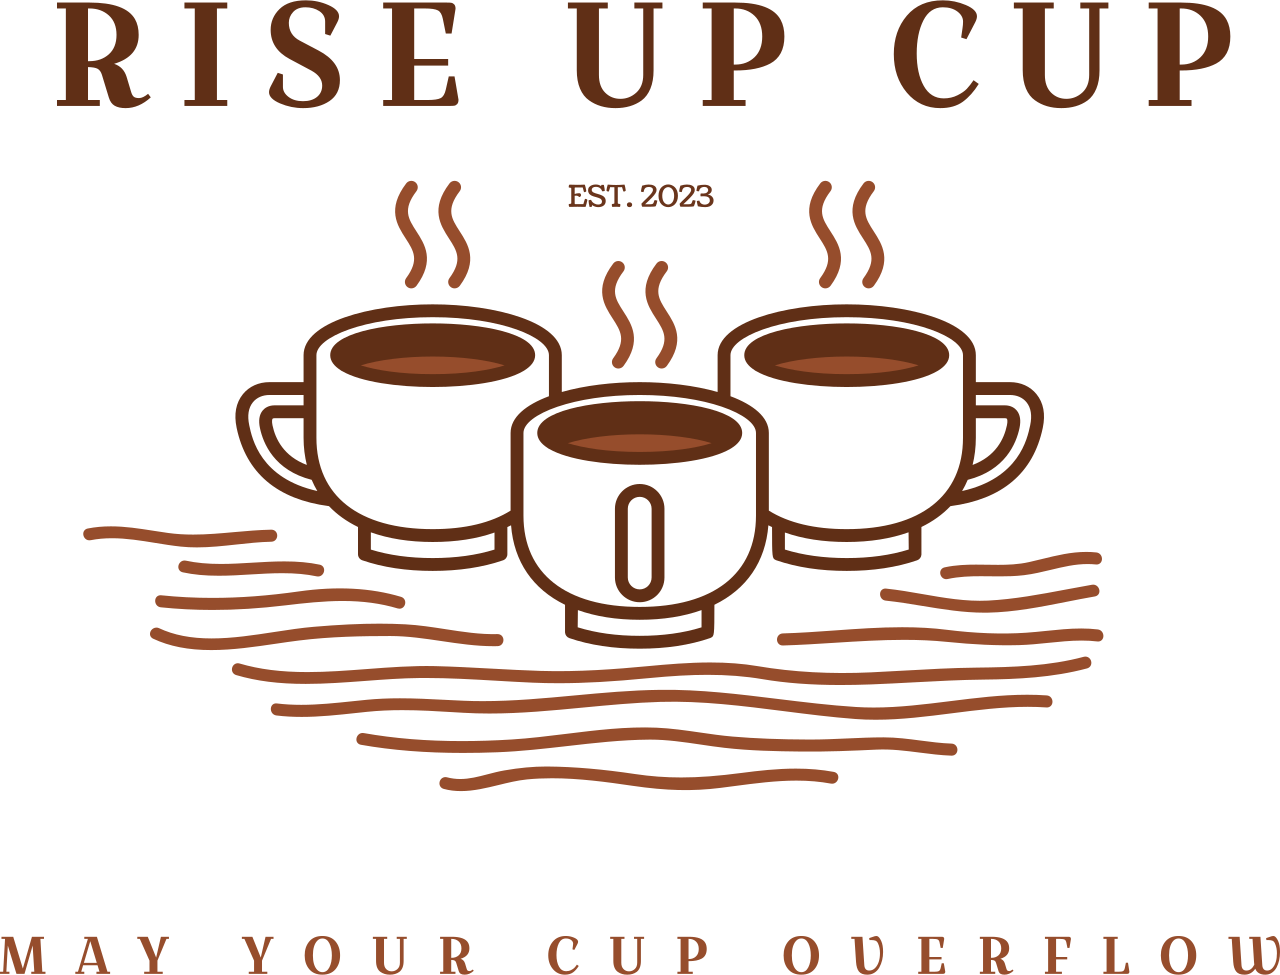 Rise Up Cup
's web page